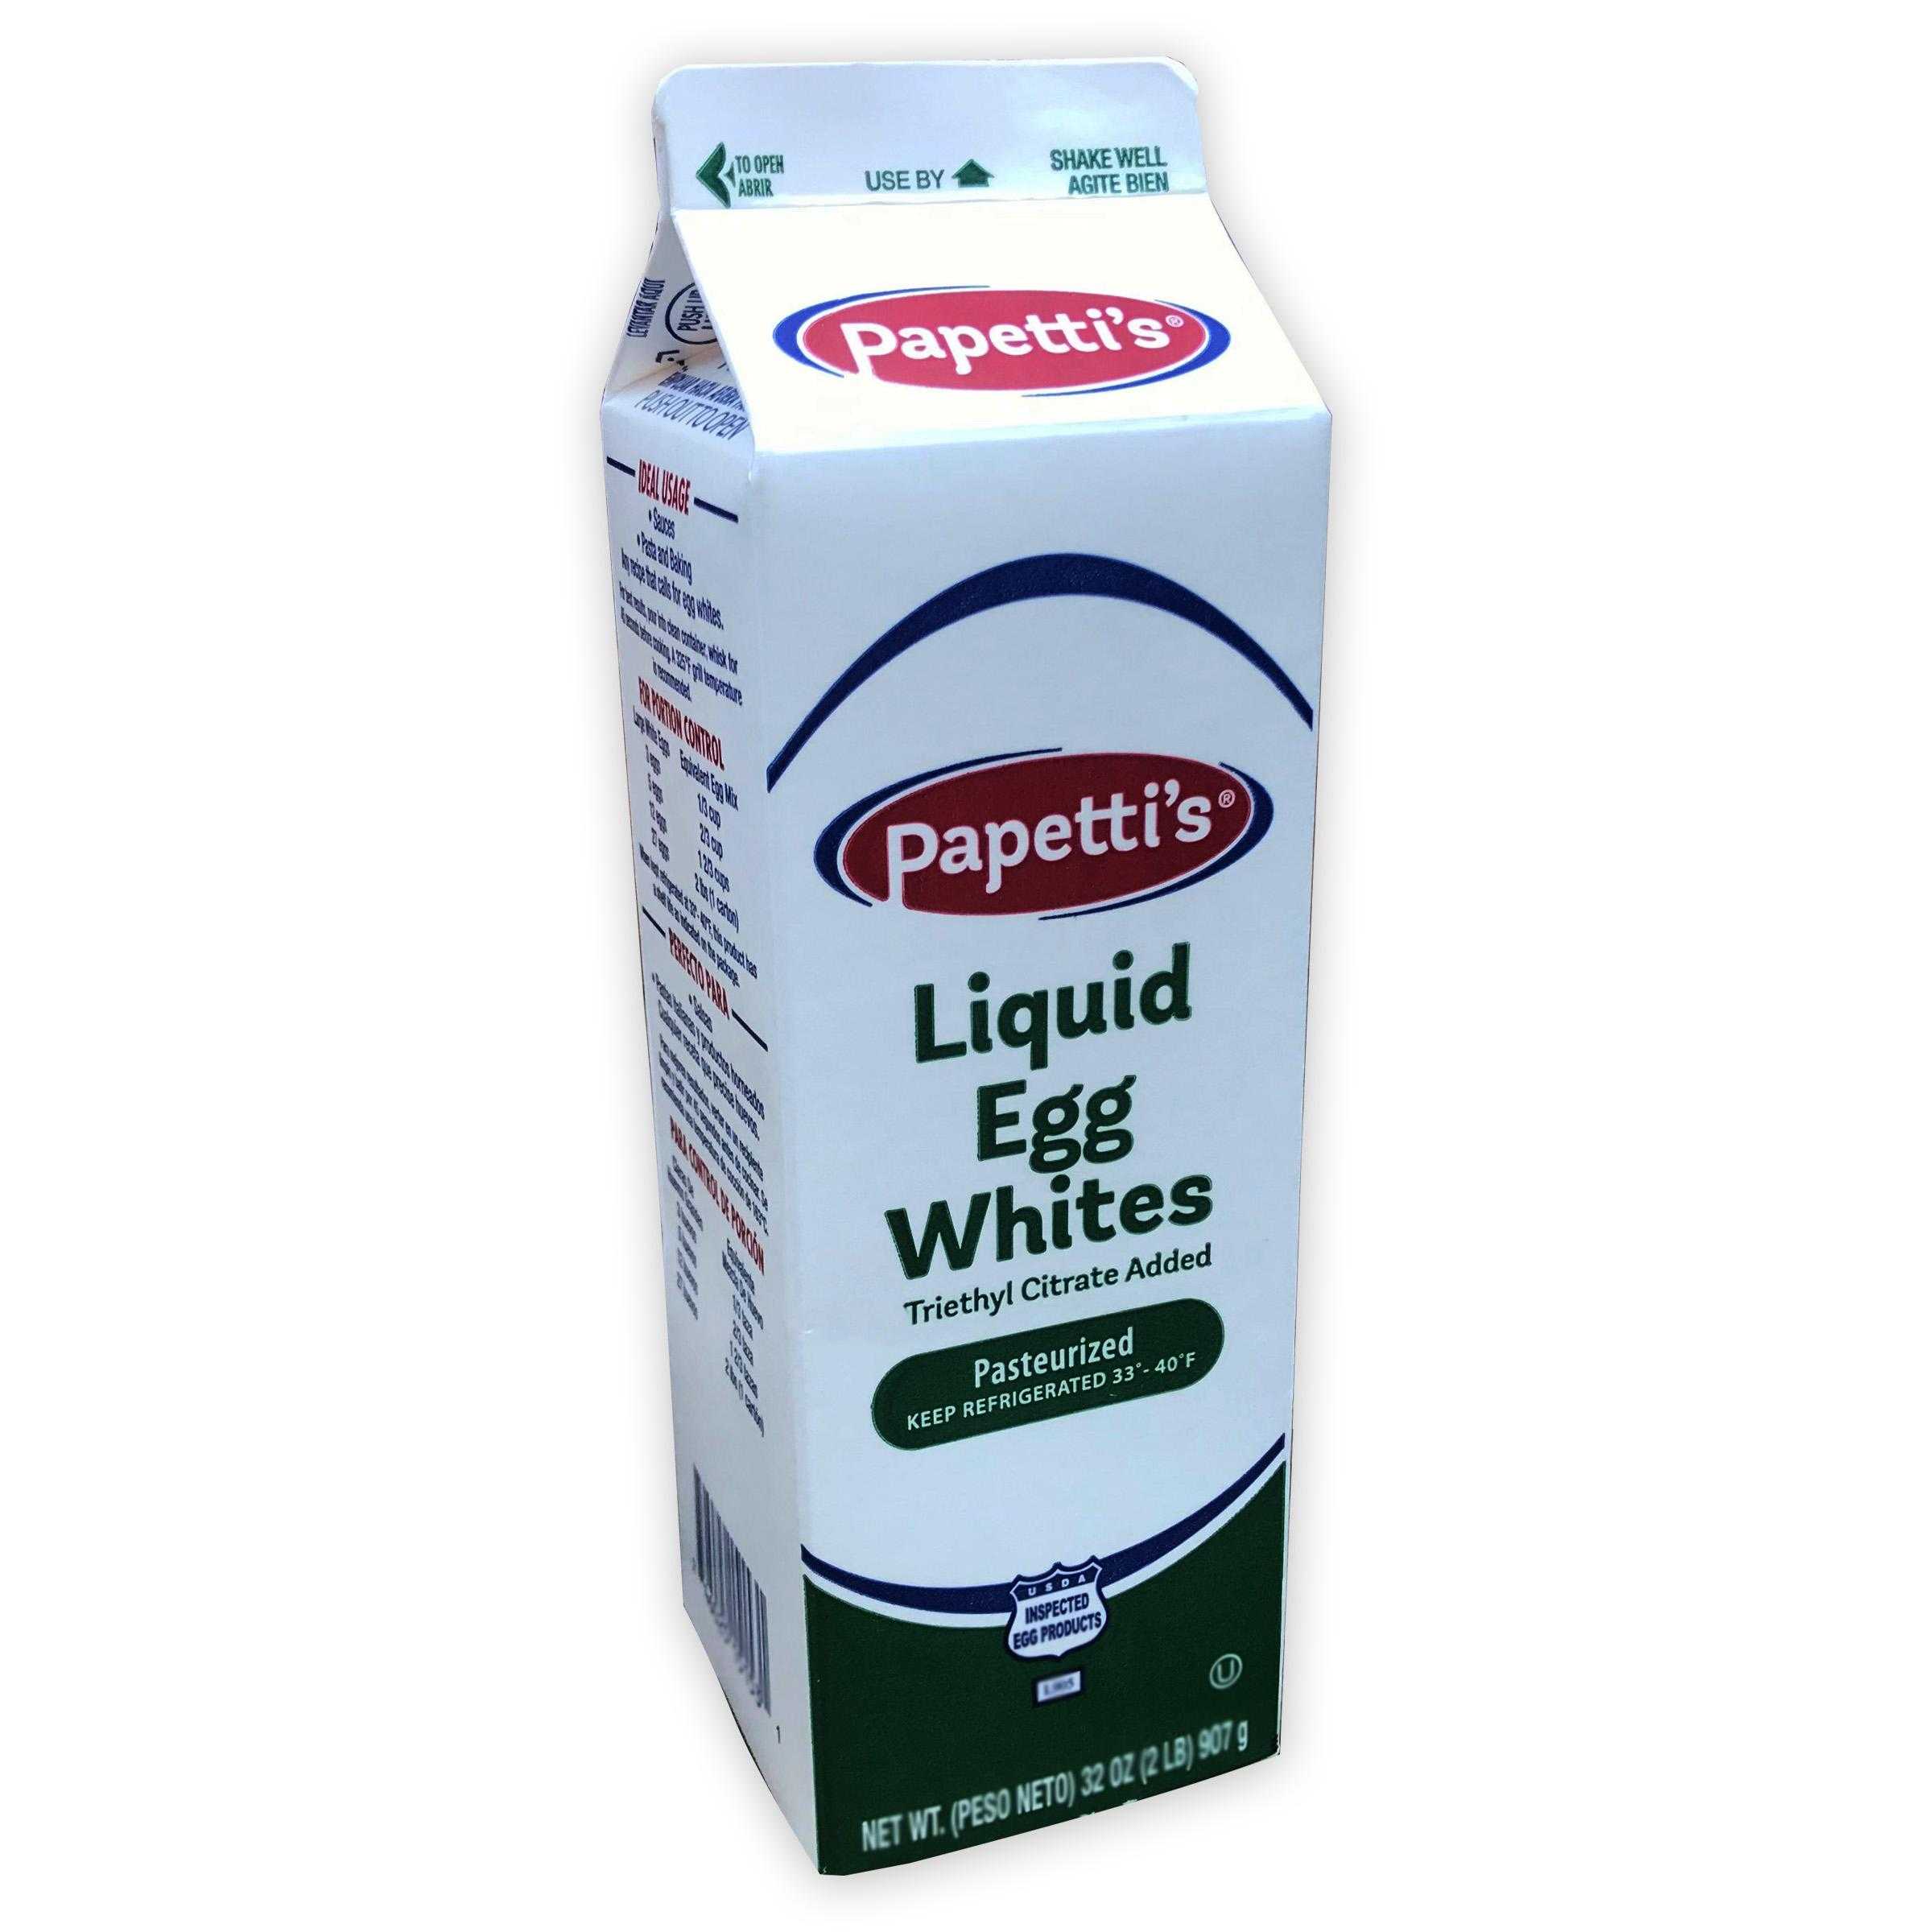 Papetti’s® Refrigerated Liquid Egg Whites with Triethyl Citrate, 15/2 Lb Cartons